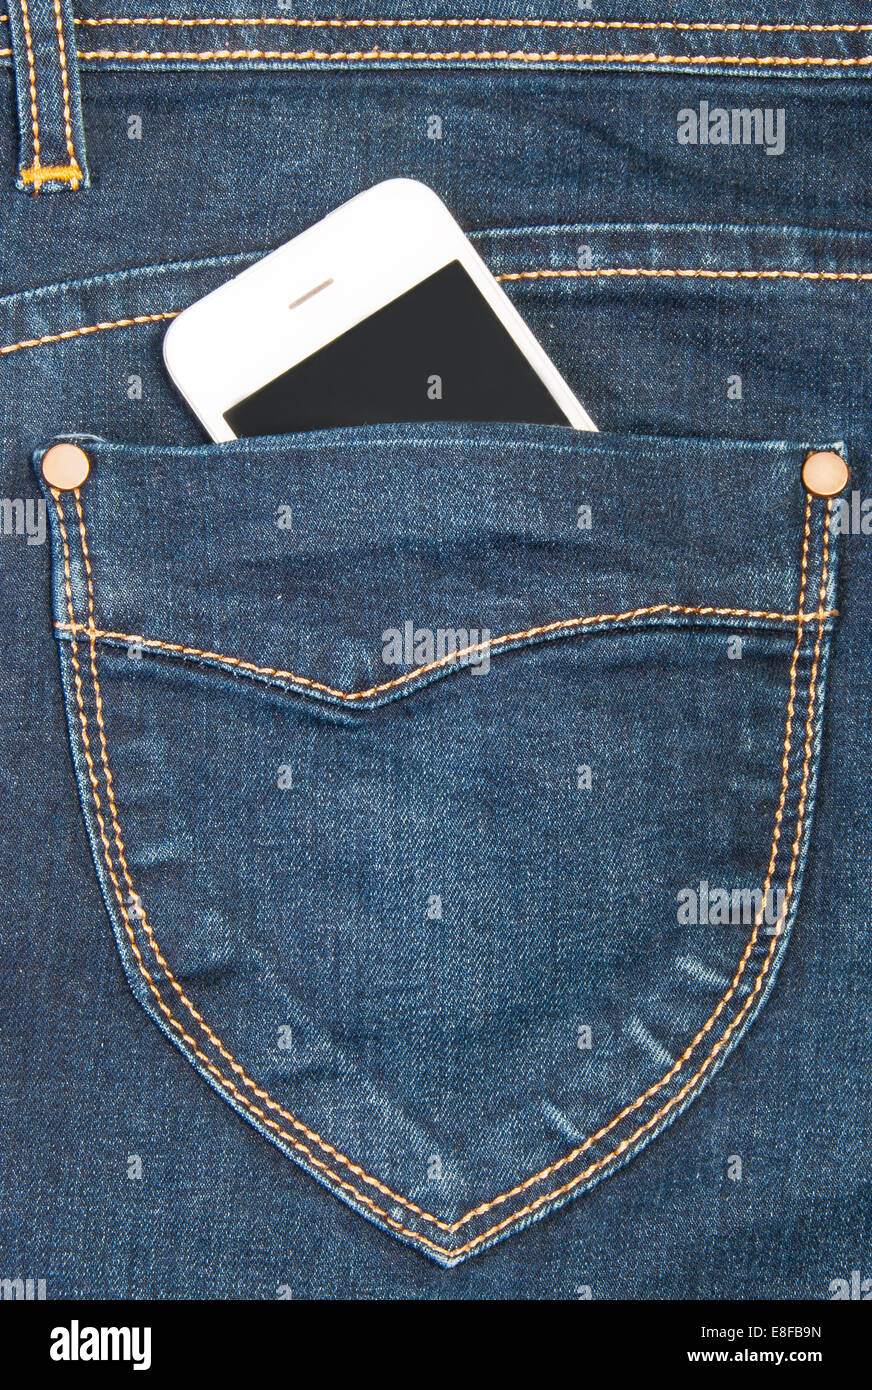 Mobile Phone In Pocket Jeans Stock Photo - Alamy